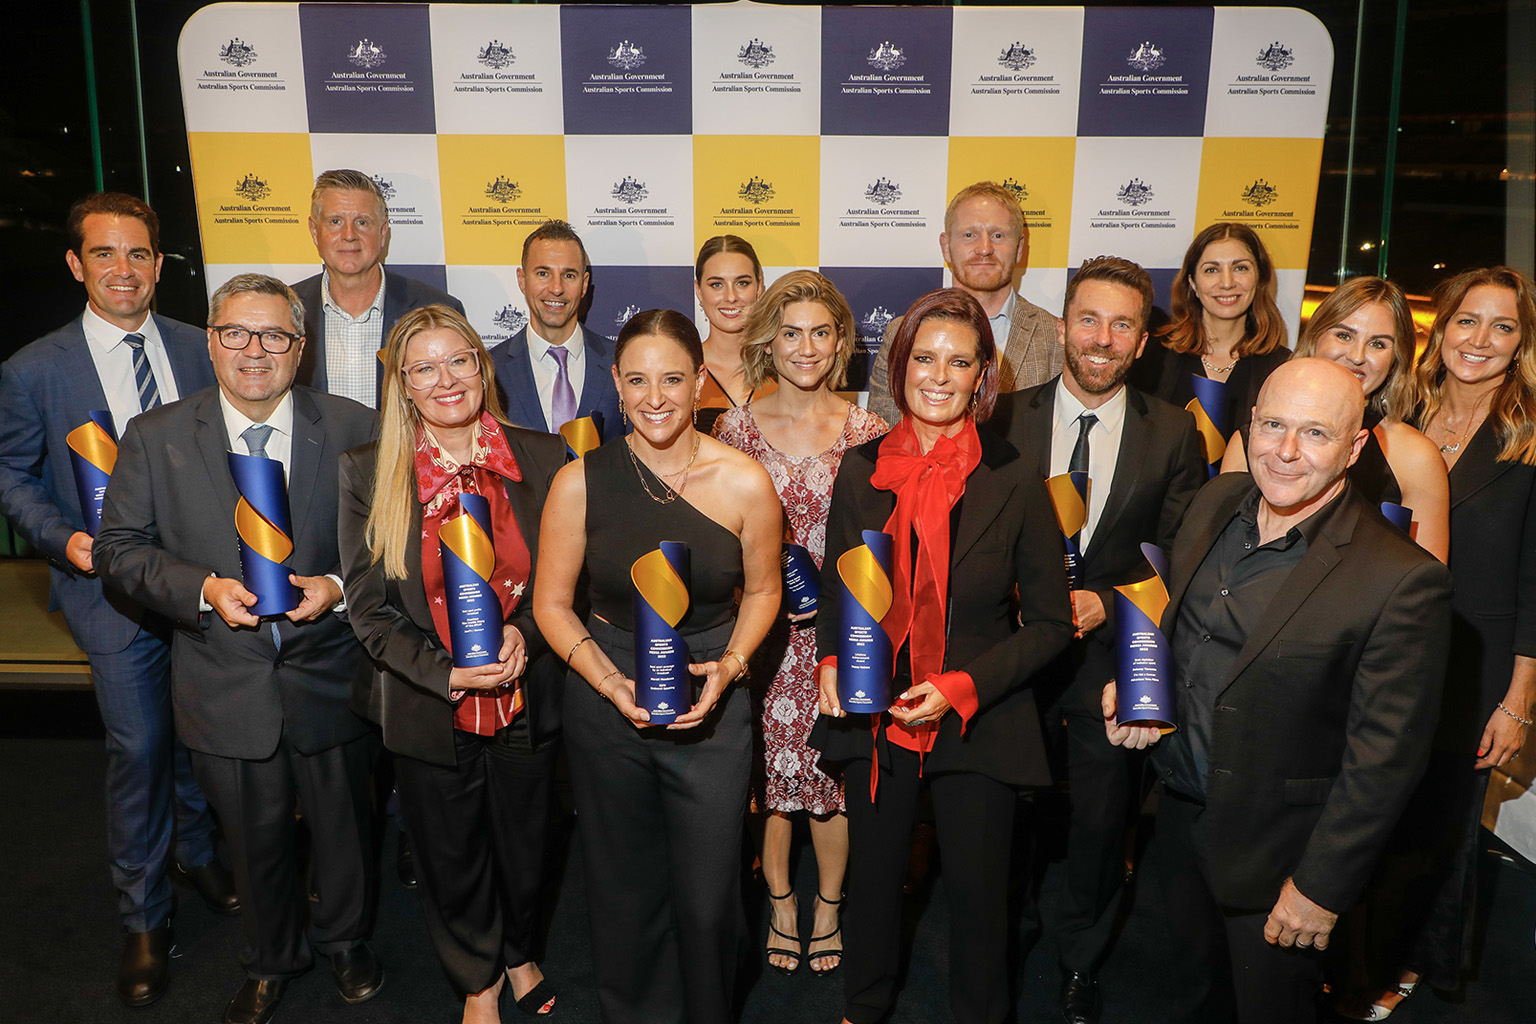 Winners with trophies at the ASC Media Awards for 2022